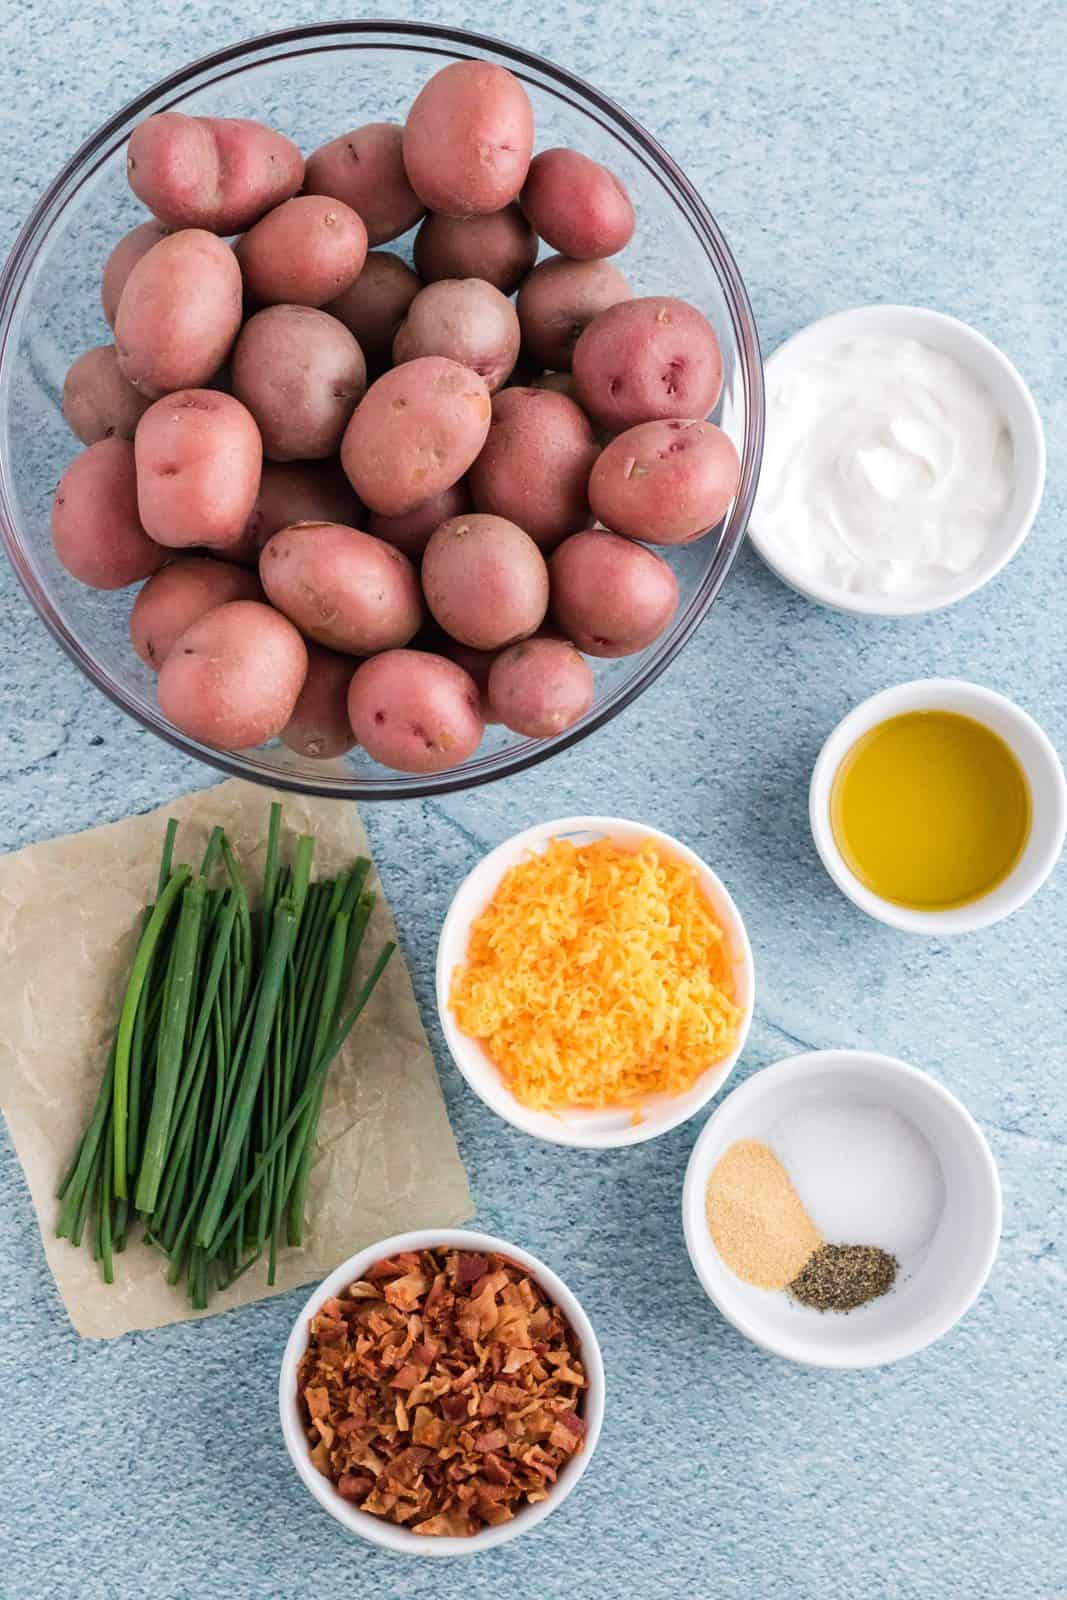 Ingredients needed: baby potatoes, olive oil, salt, garlic powder, pepper, cheddar cheese, sour cream, bacon crumbles and chives.